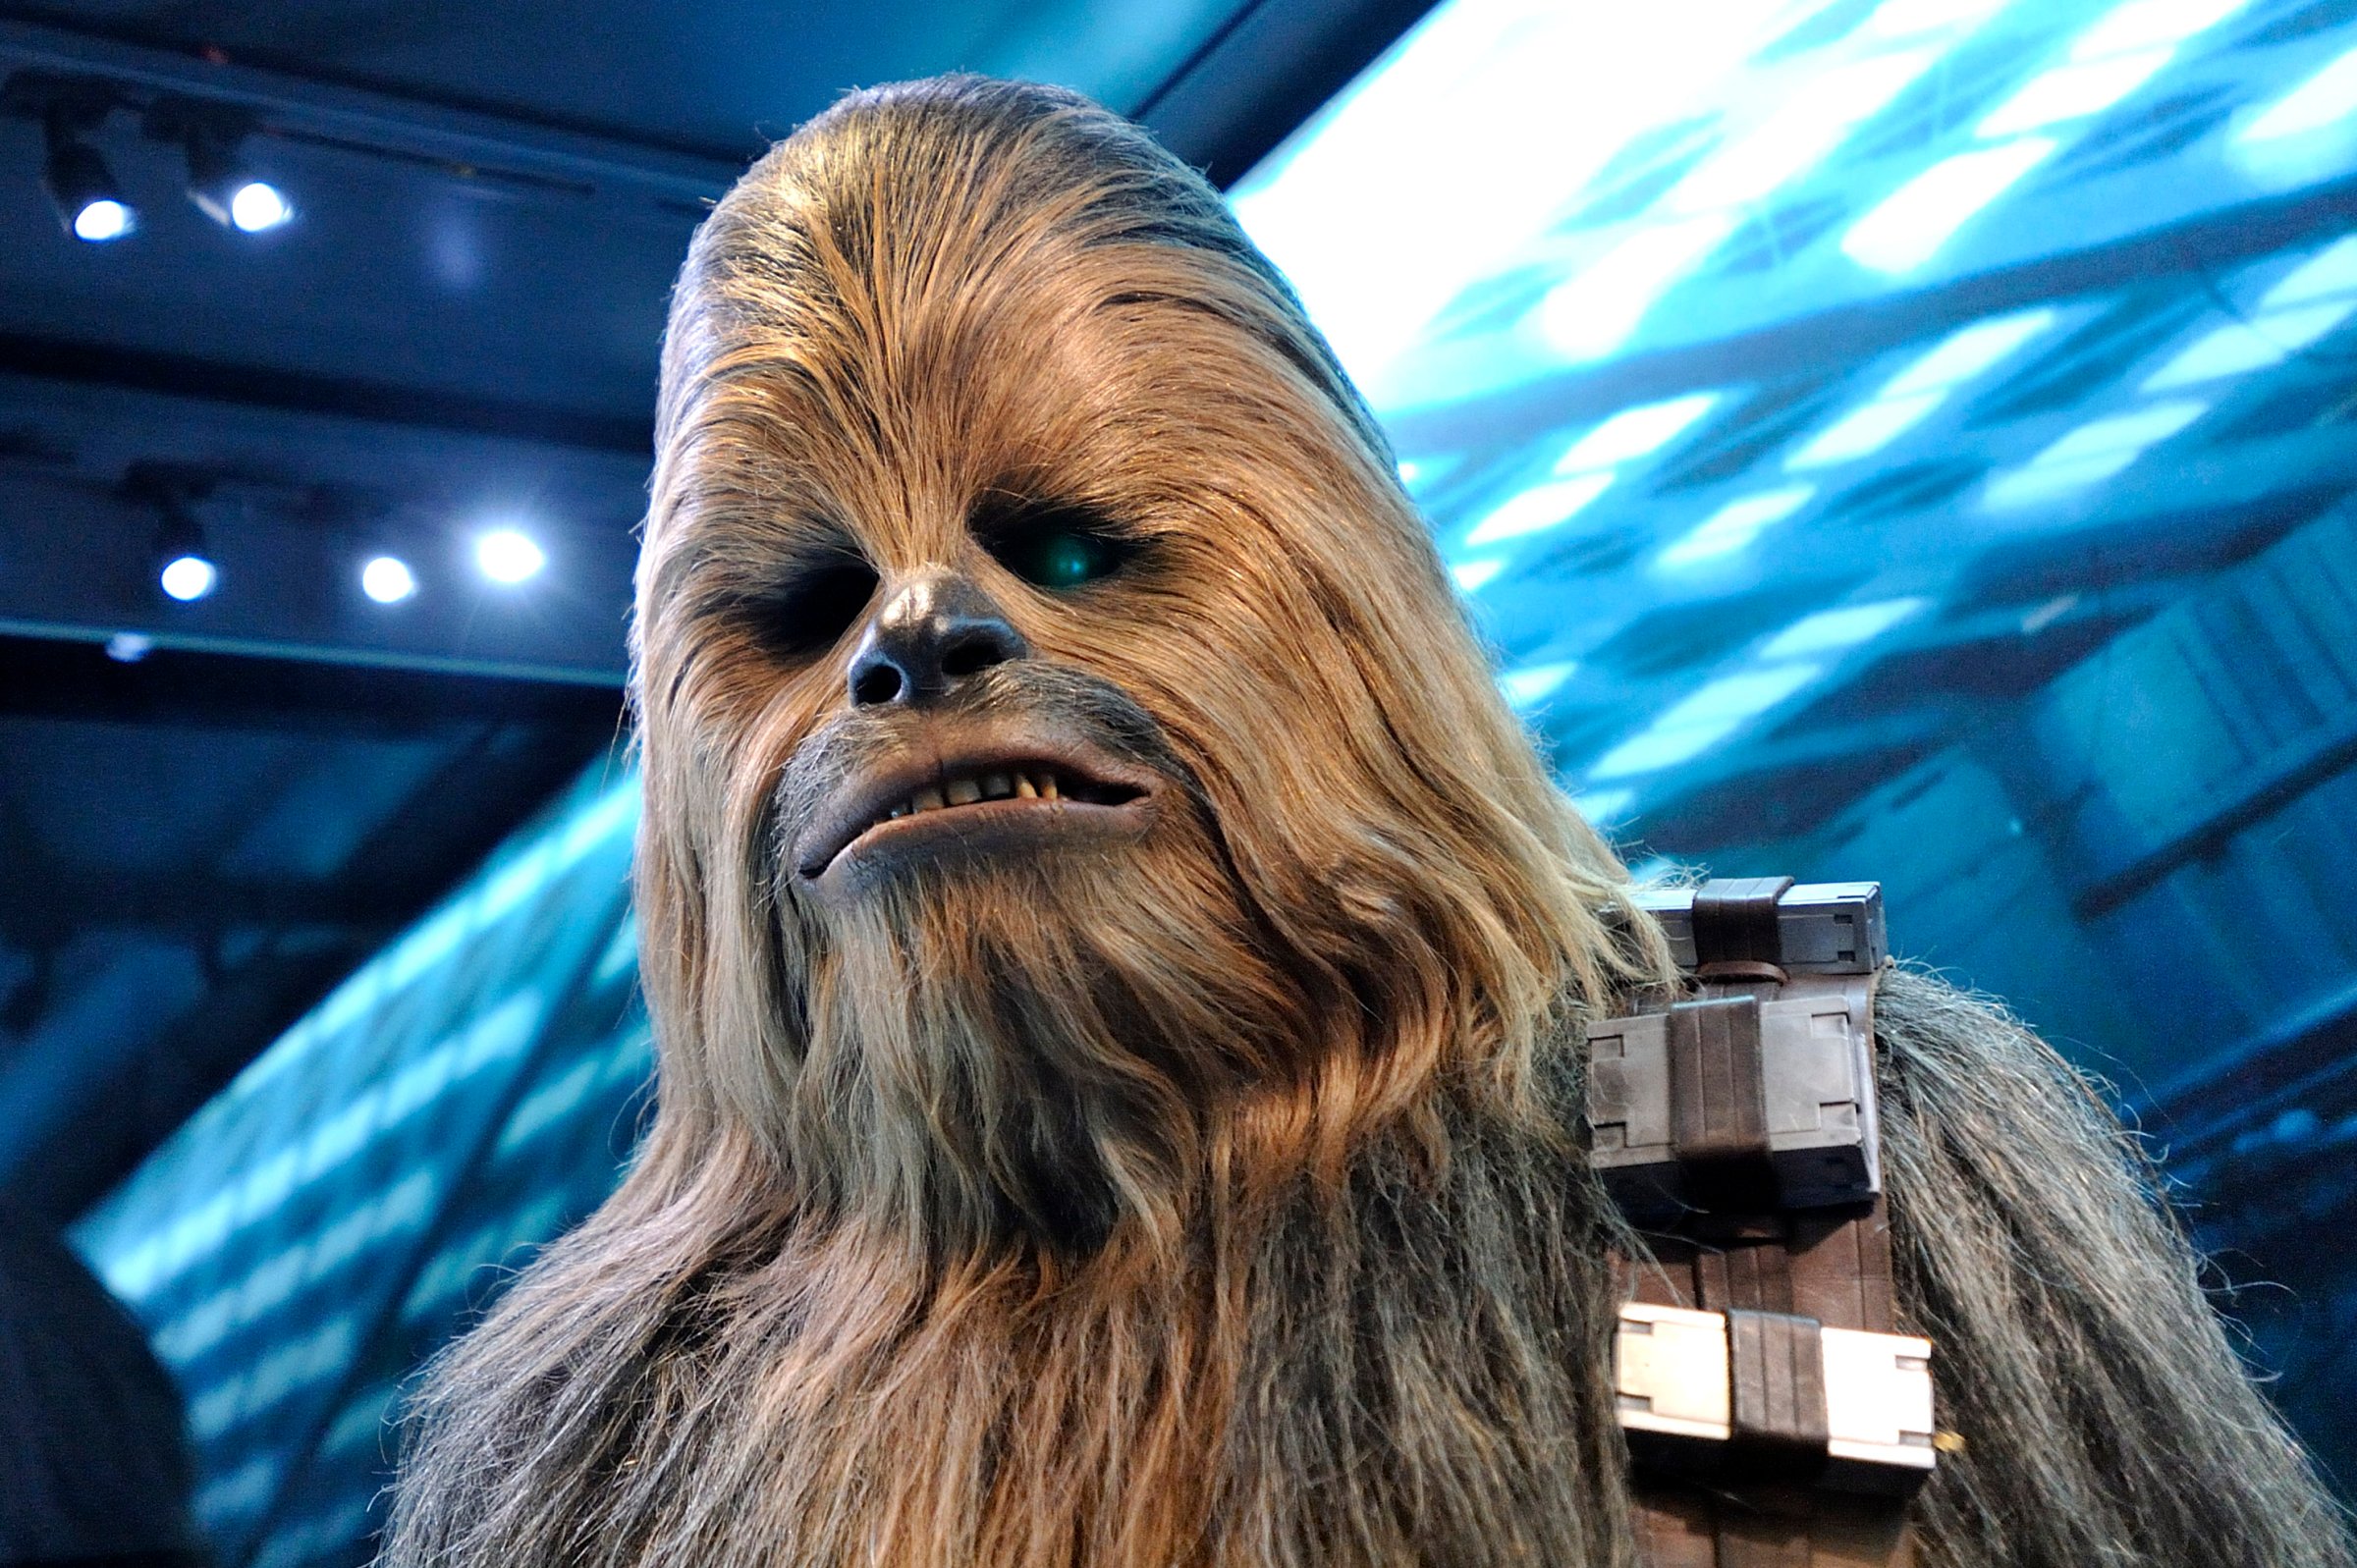 Chewbacca during a Straw Wars press event.